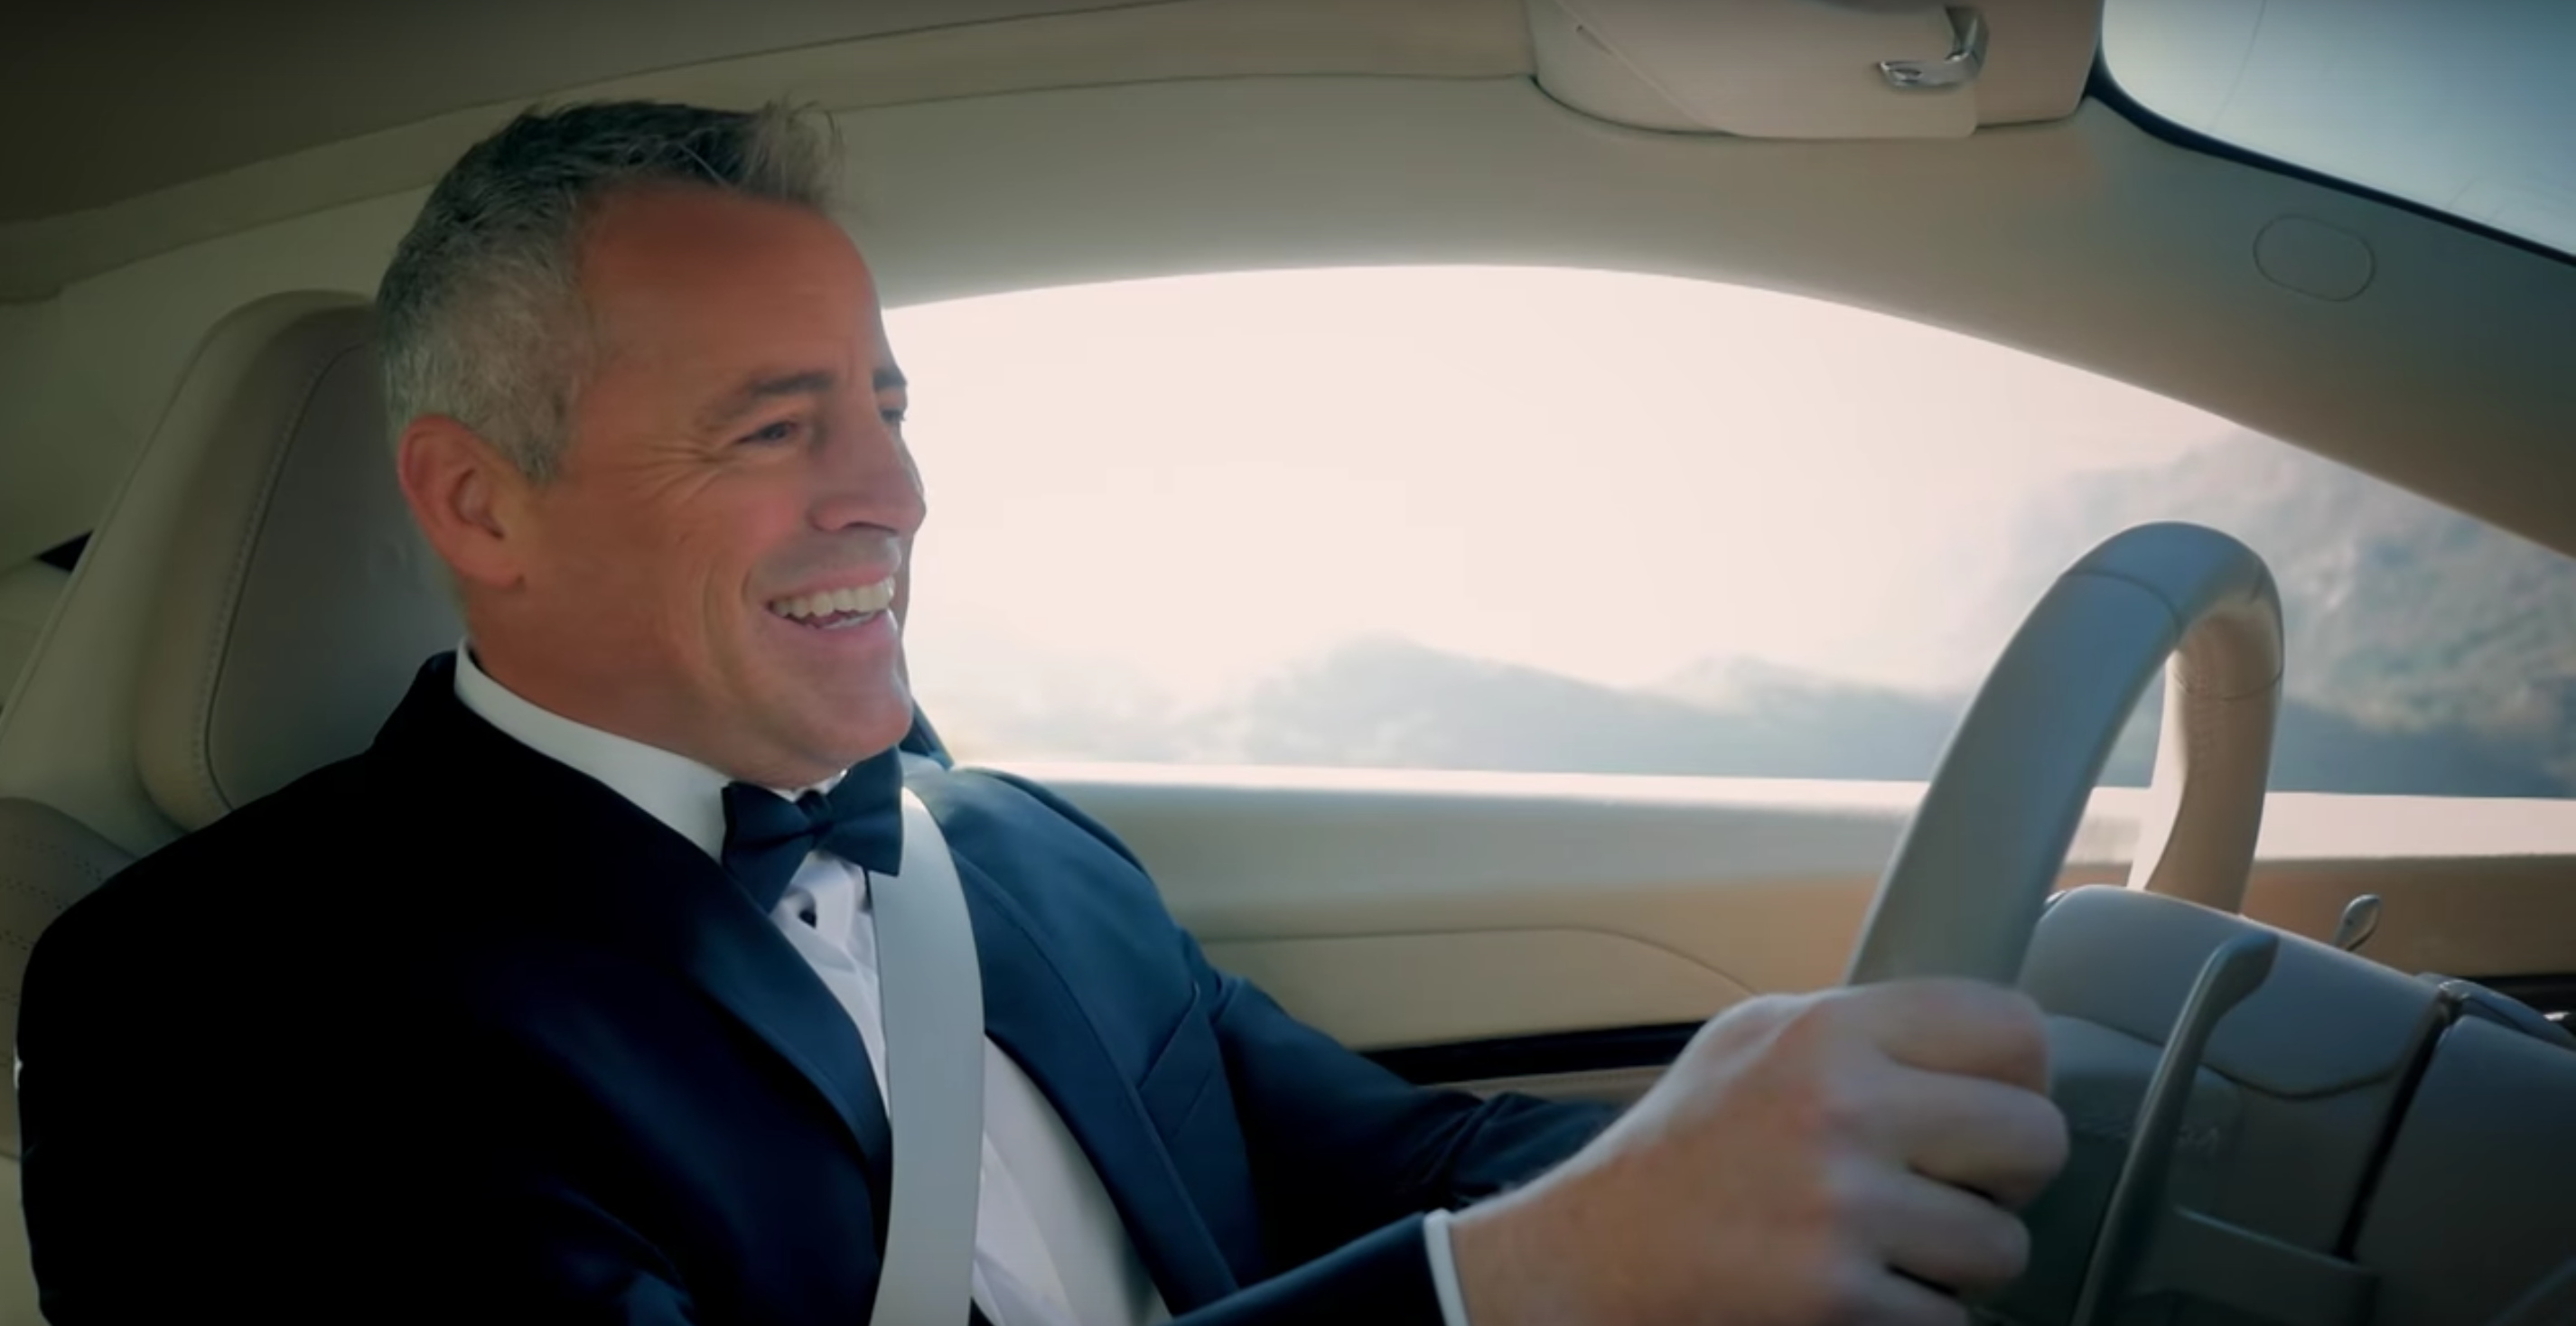 Top Gear review – sorry Matt LeBlanc, there's just too much